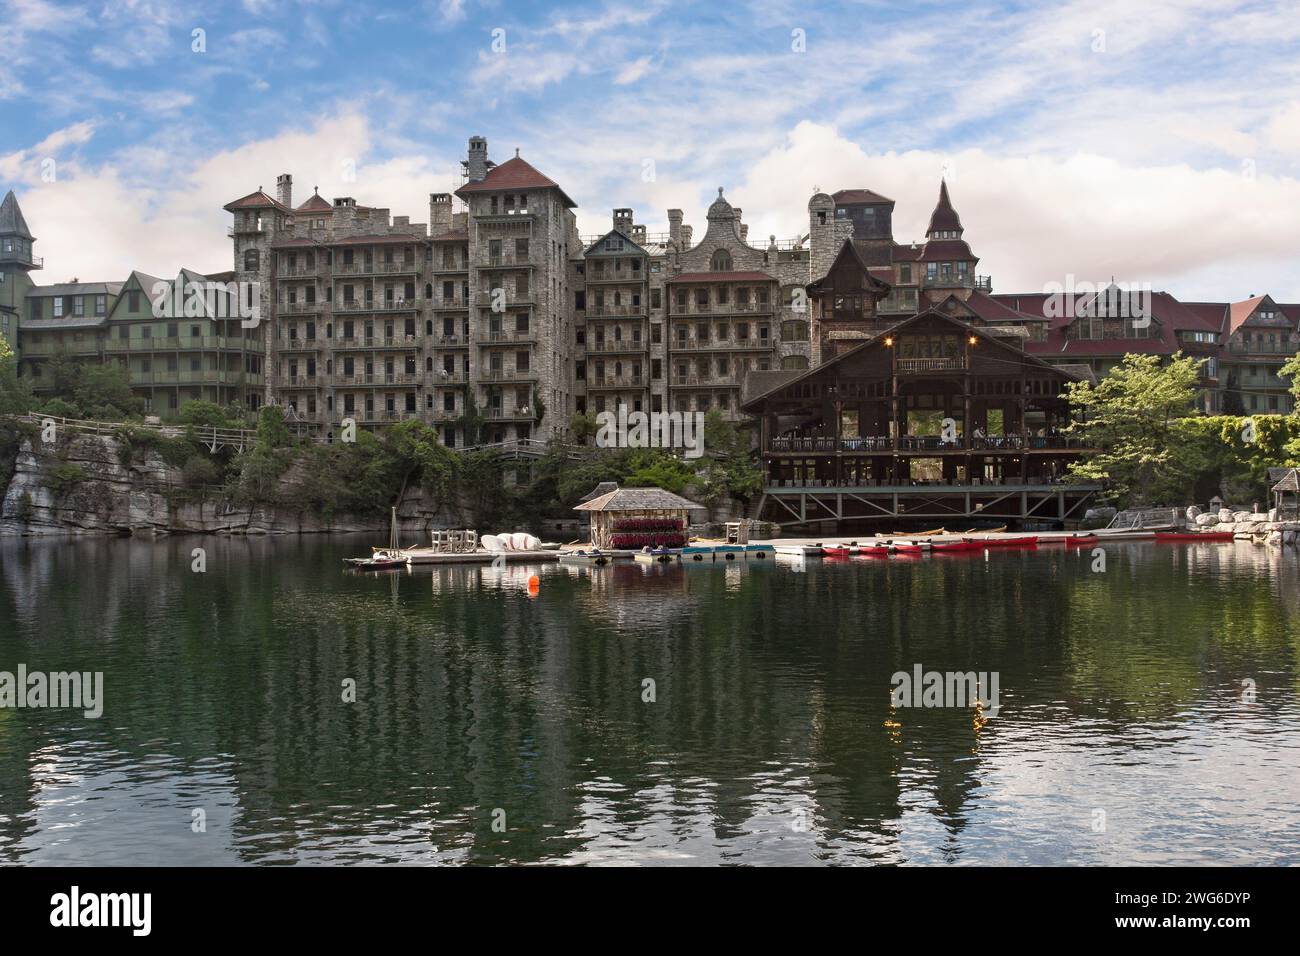 Mohonk Mountain House, historic Victorian hotel in upstate New York, New Paltz. Stock Photo